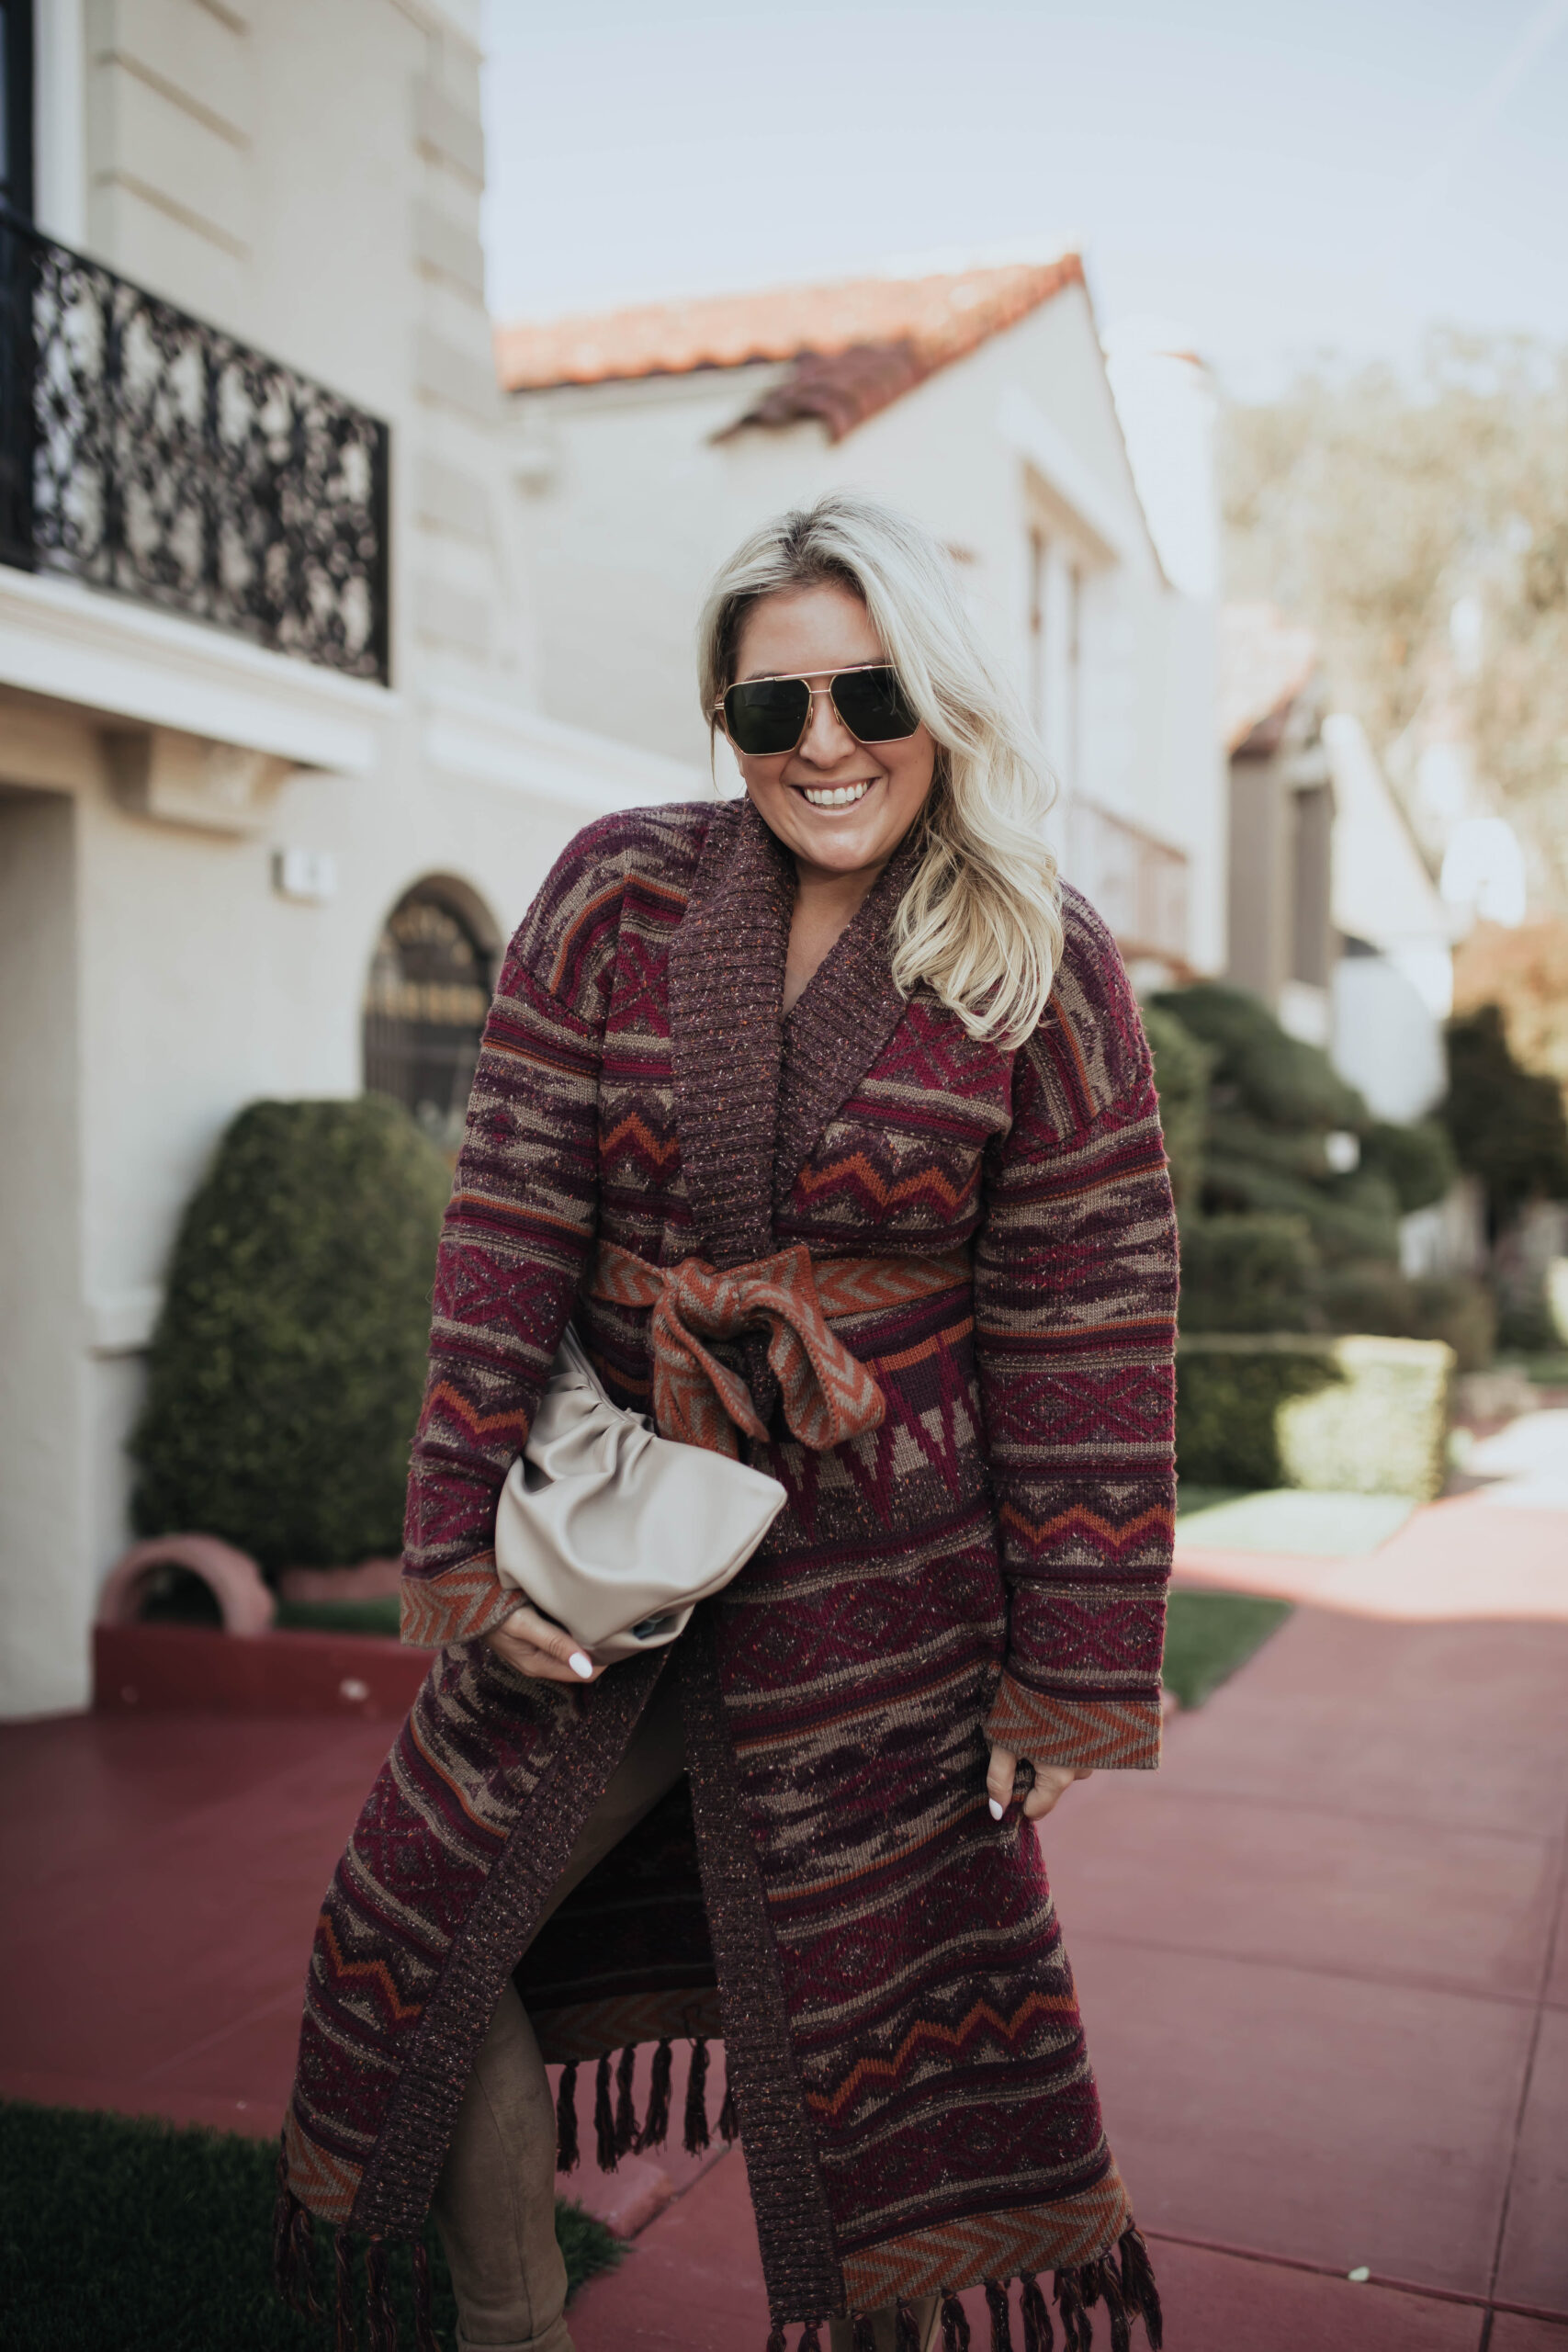 San Francisco fashion blogger KatWalkSF wears the House of Harlow Guinevere Duster with the Senreve Conetti Bag